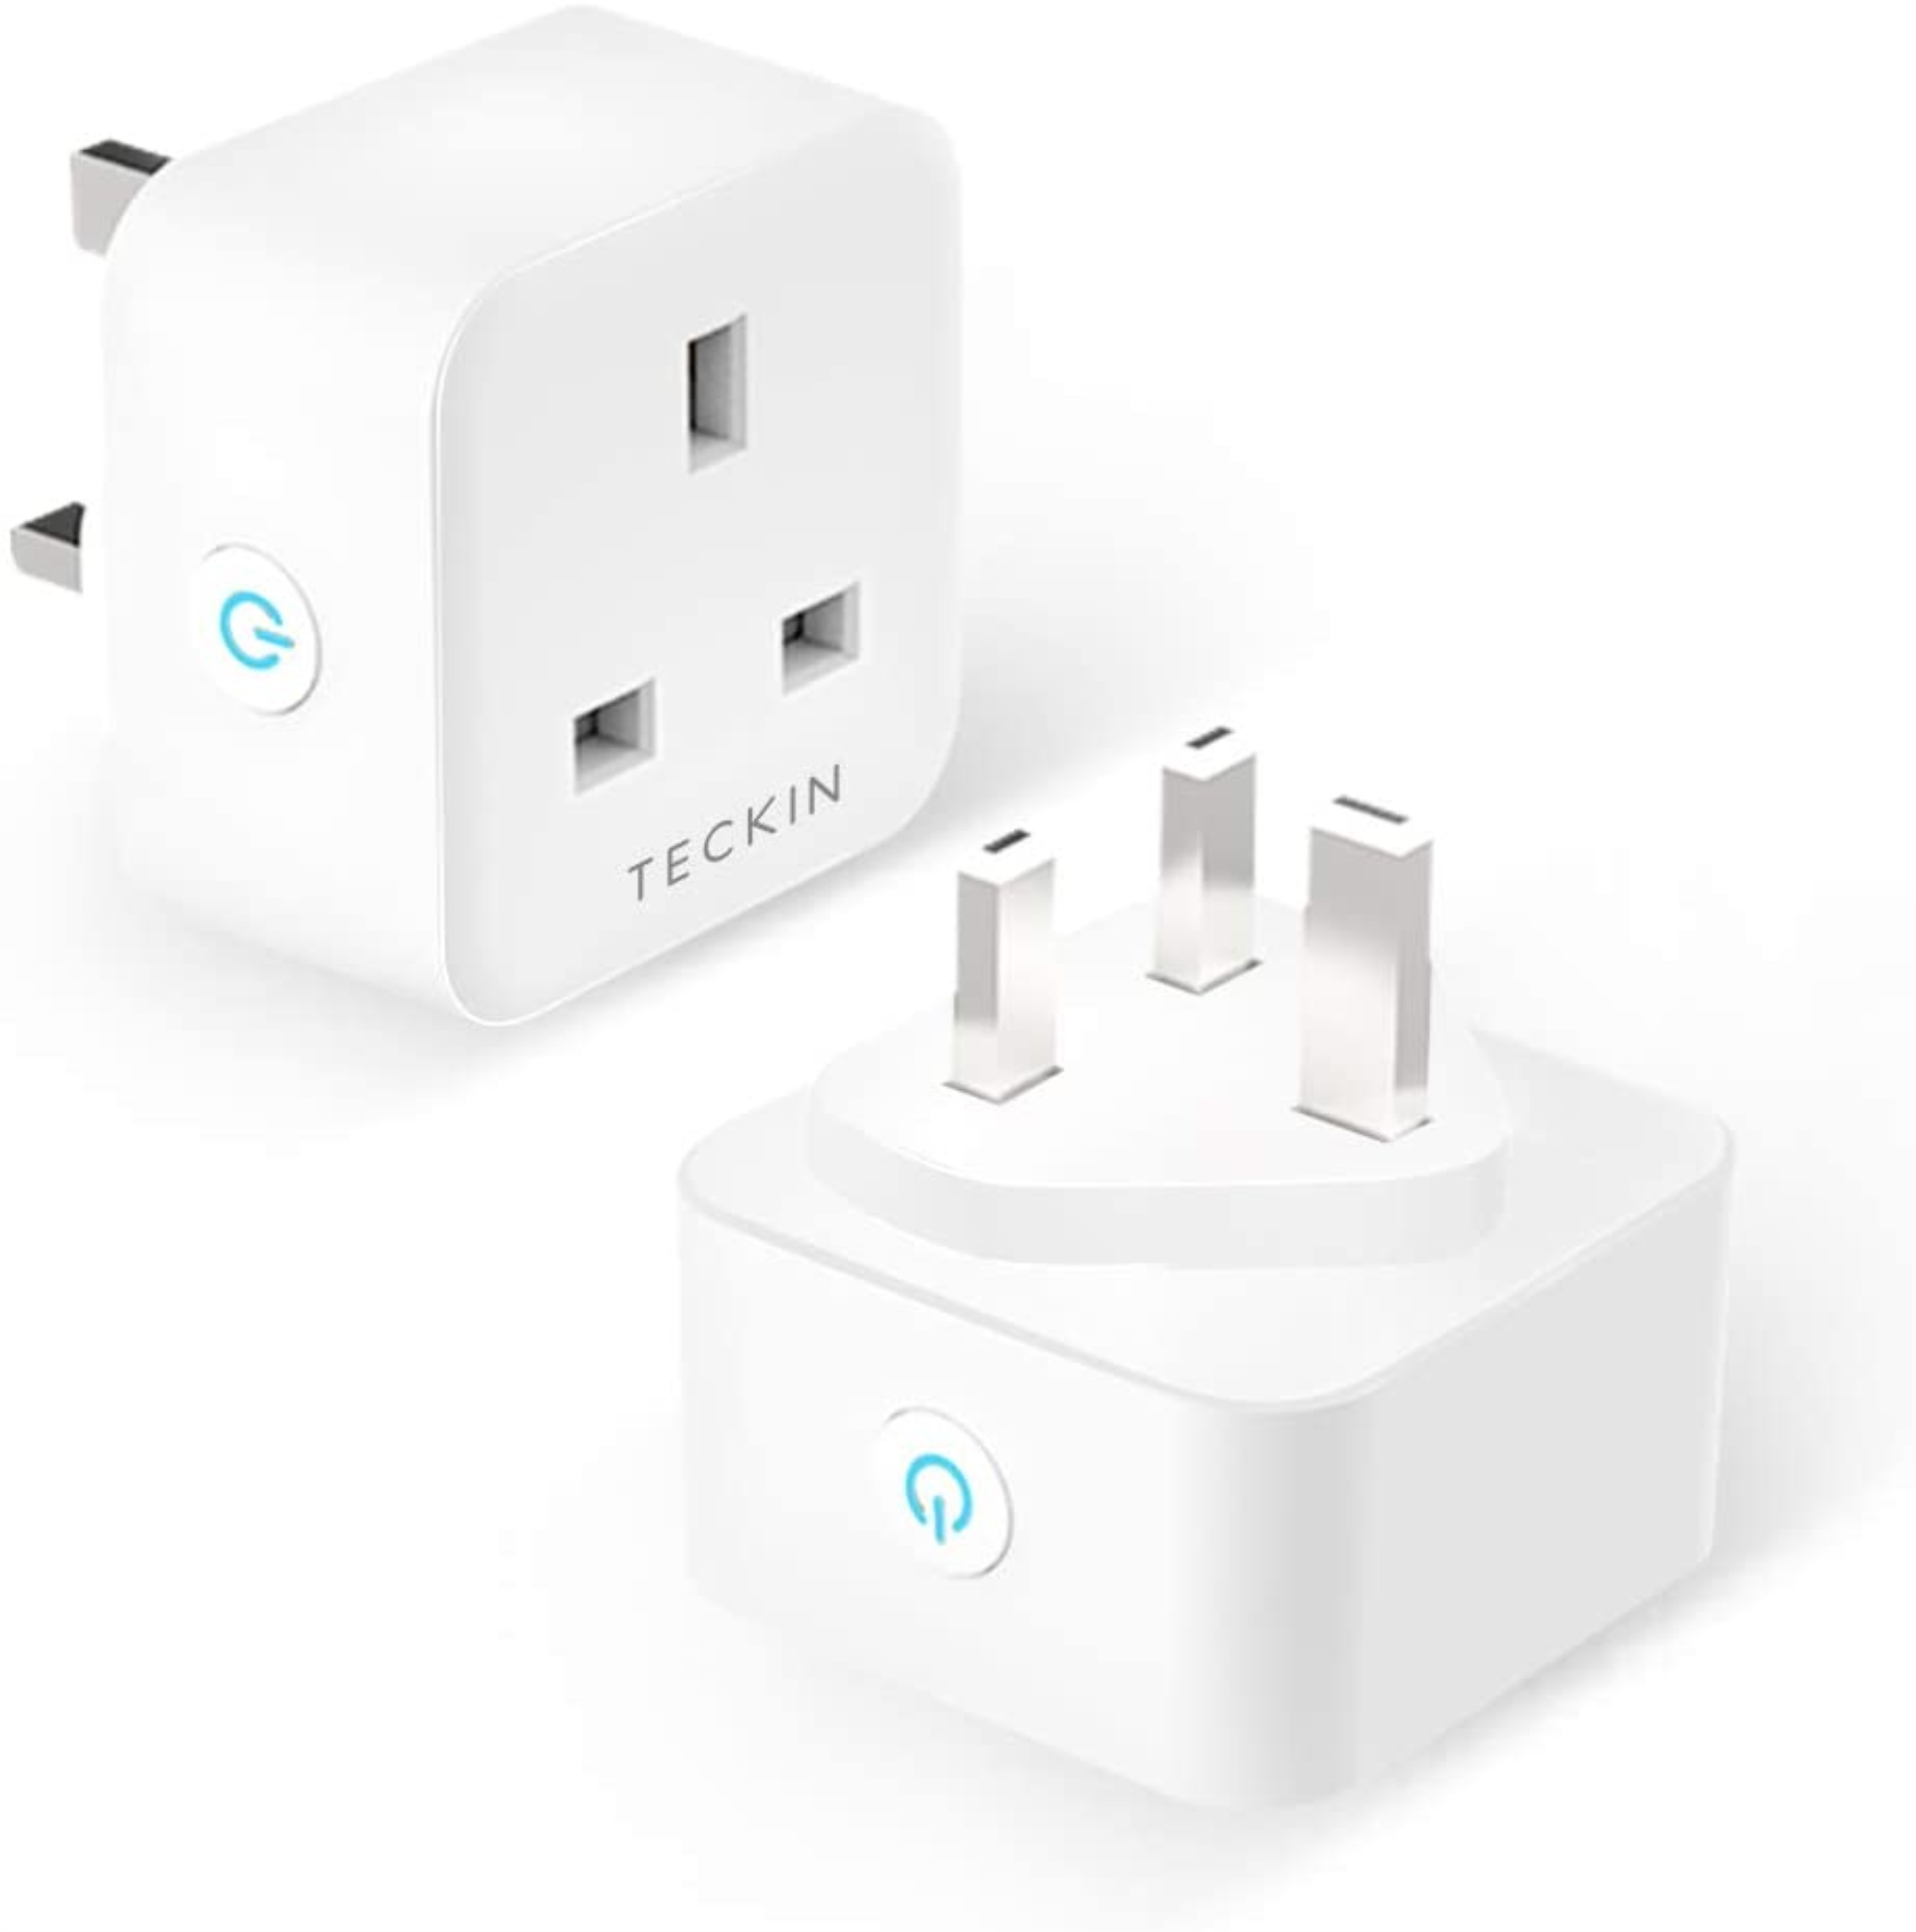 Teckin SP23 Smart Plug (New and old versions are shipped randomly)